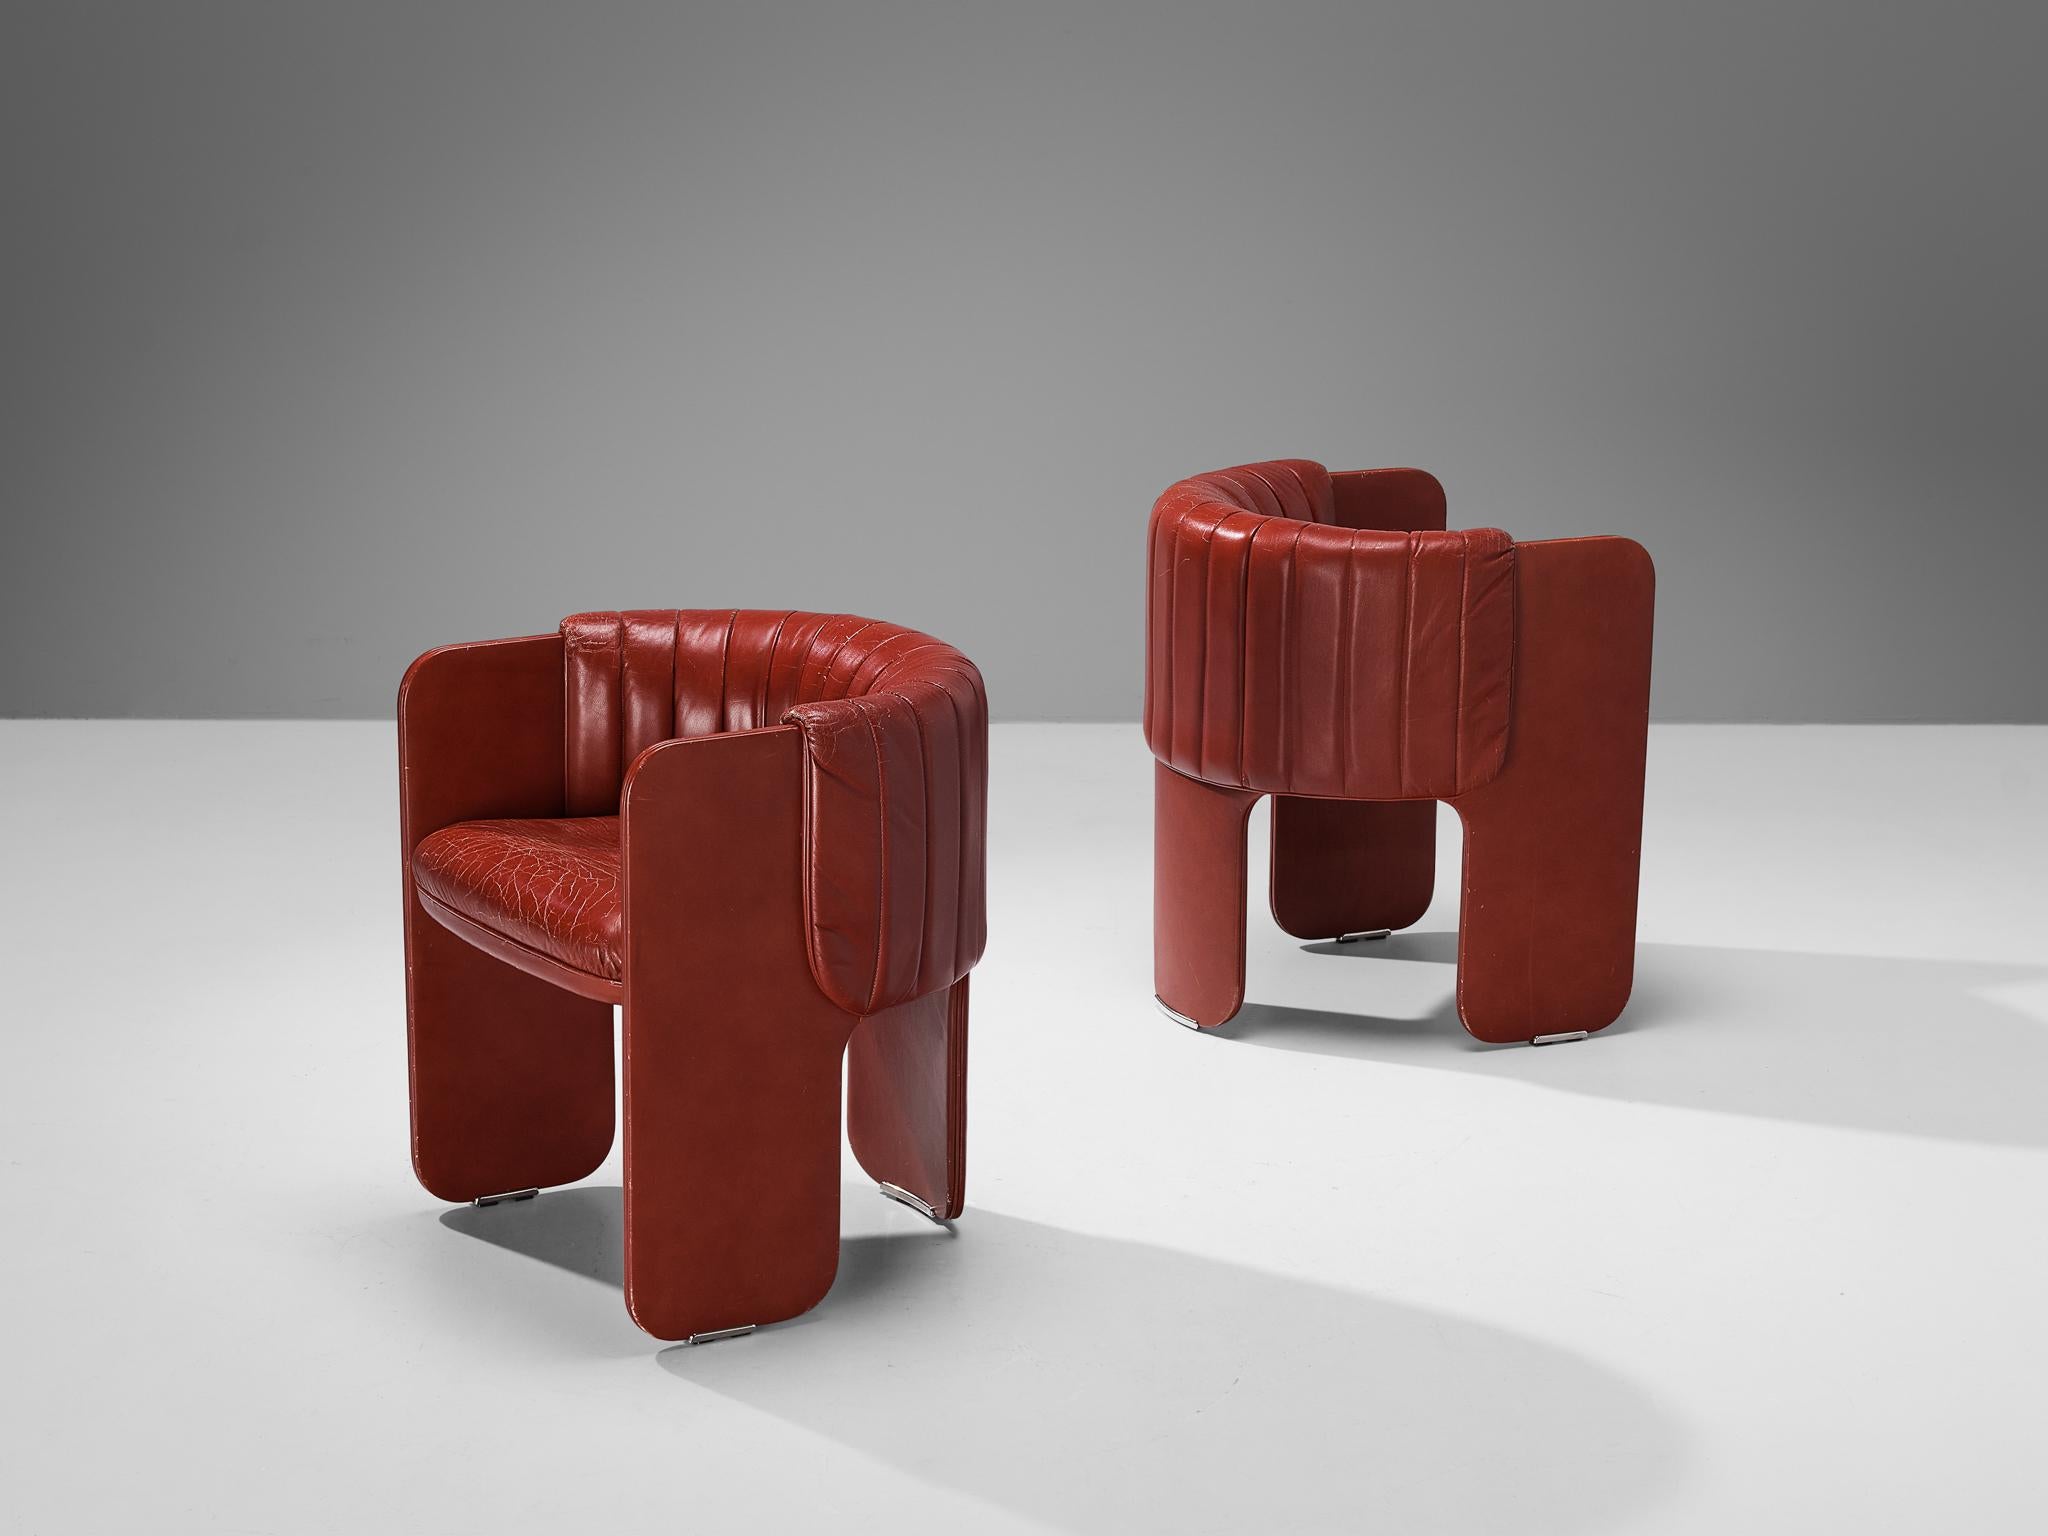 Luigi Massoni for Poltrona Frau, pair of armchairs, model ‘Dinette’, leather, chrome, Italy, 1972

This pair of dining chairs epitomizes a splendid construction based on characteristic shapes and executed in a vivid burgundy red leather. Therefore,